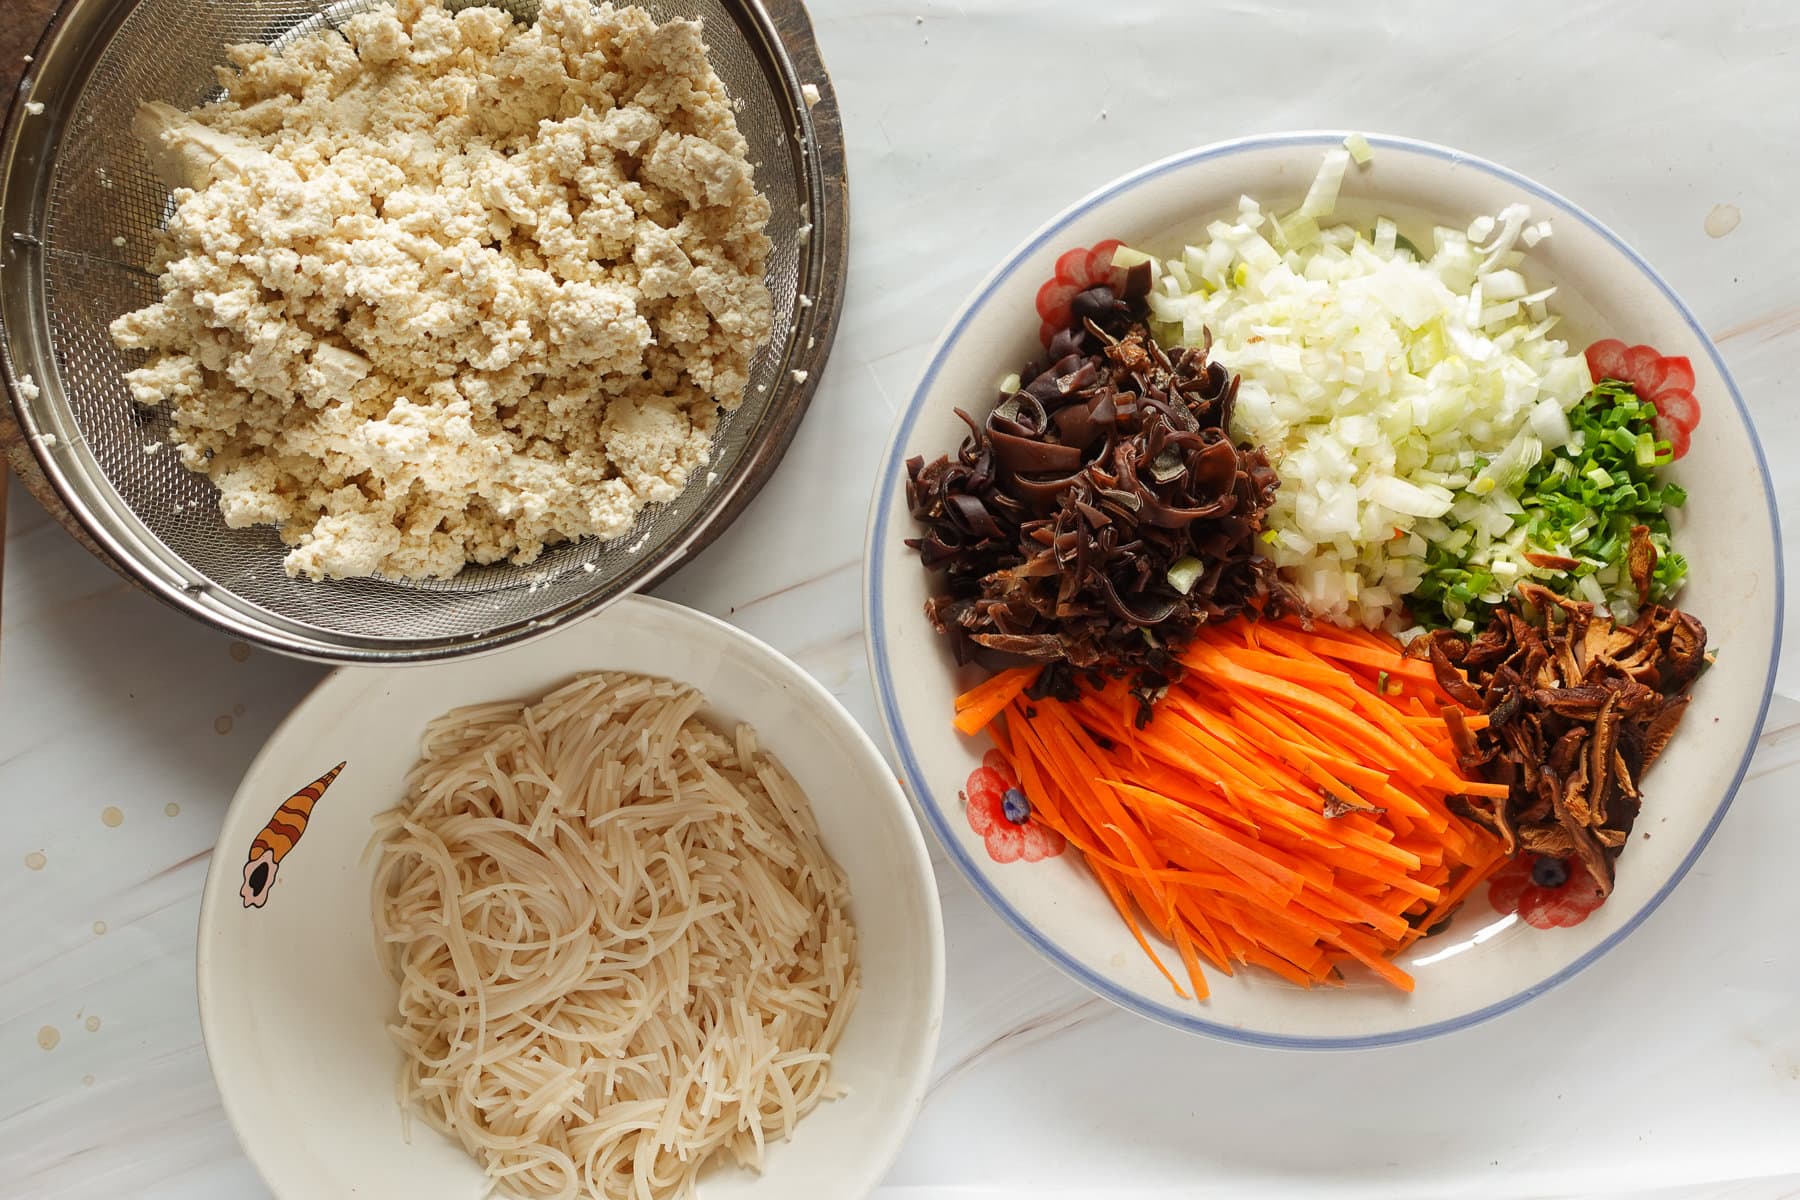 Prepare the ingredients: mushrooms, onion, green onion, carrot, tofu, glass noodles